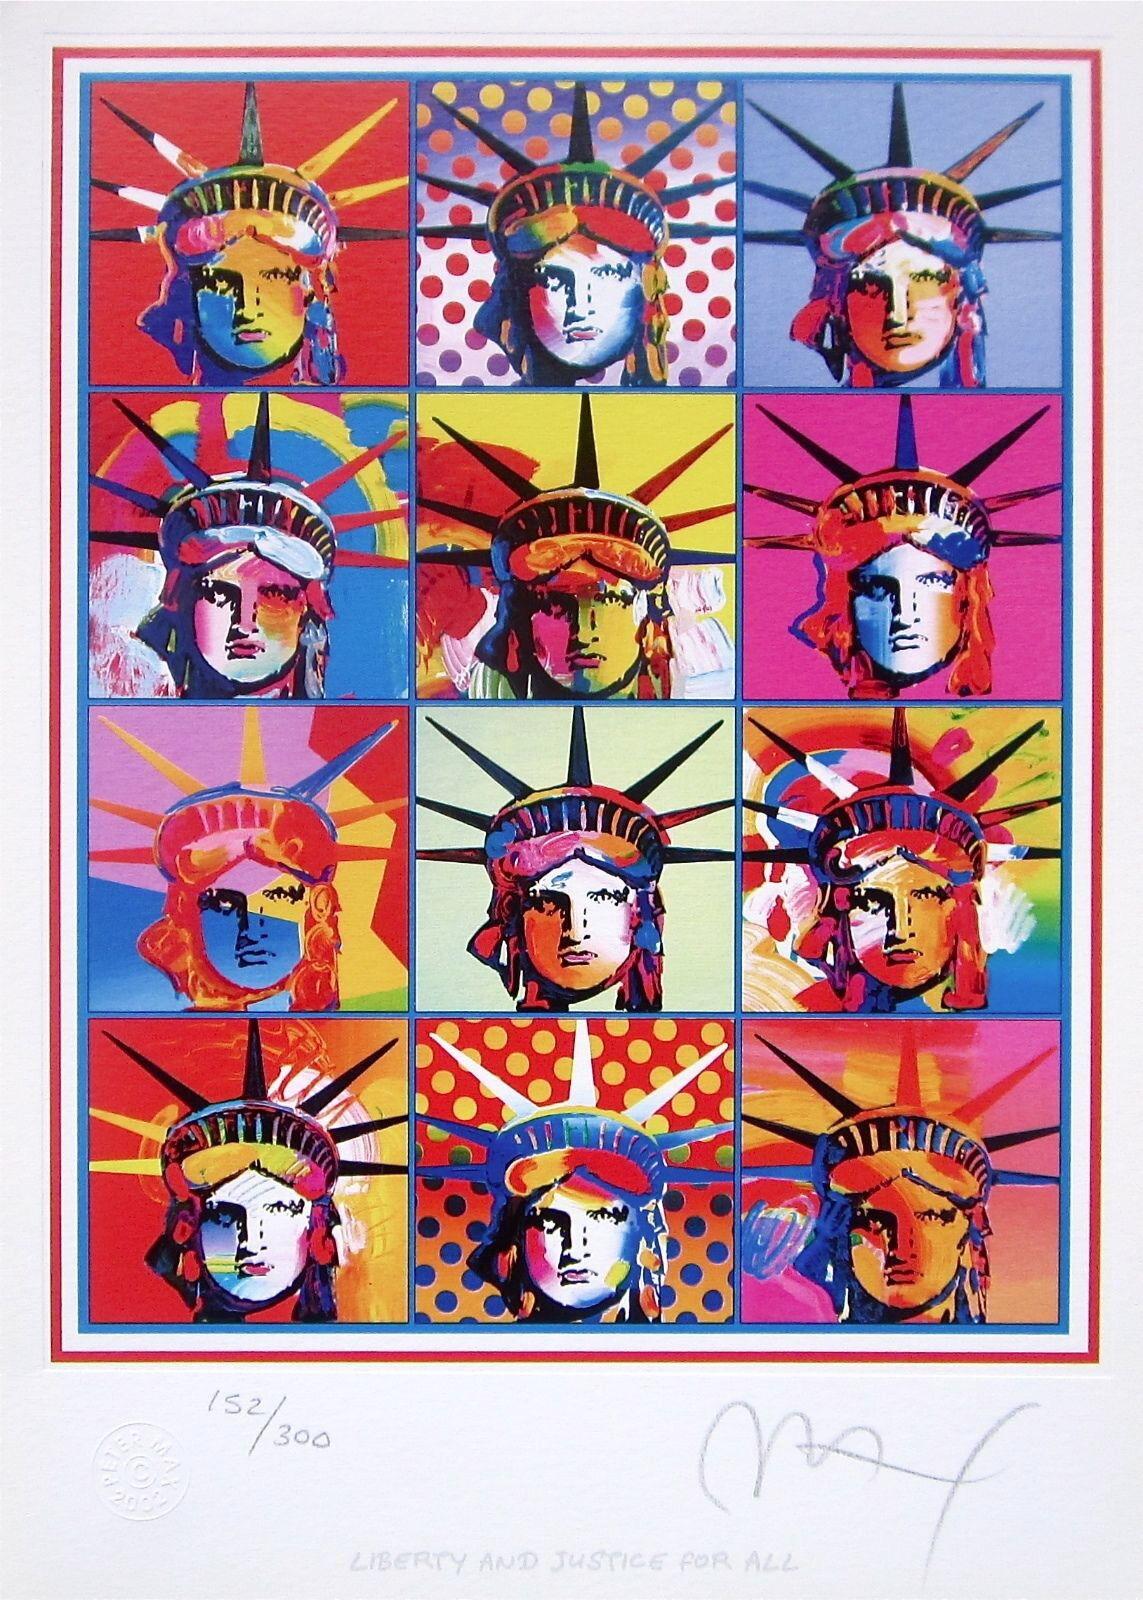 Artist: Peter Max (1937)
Title: Liberty & Justice for All
Year: 2002
Edition: 300, plus proofs
Medium: Lithograph on Lustro Saxony paper
Size: 12.5 x 9 inches
Condition: Excellent
Inscription: Signed and numbered by the artist.
Notes: Published by